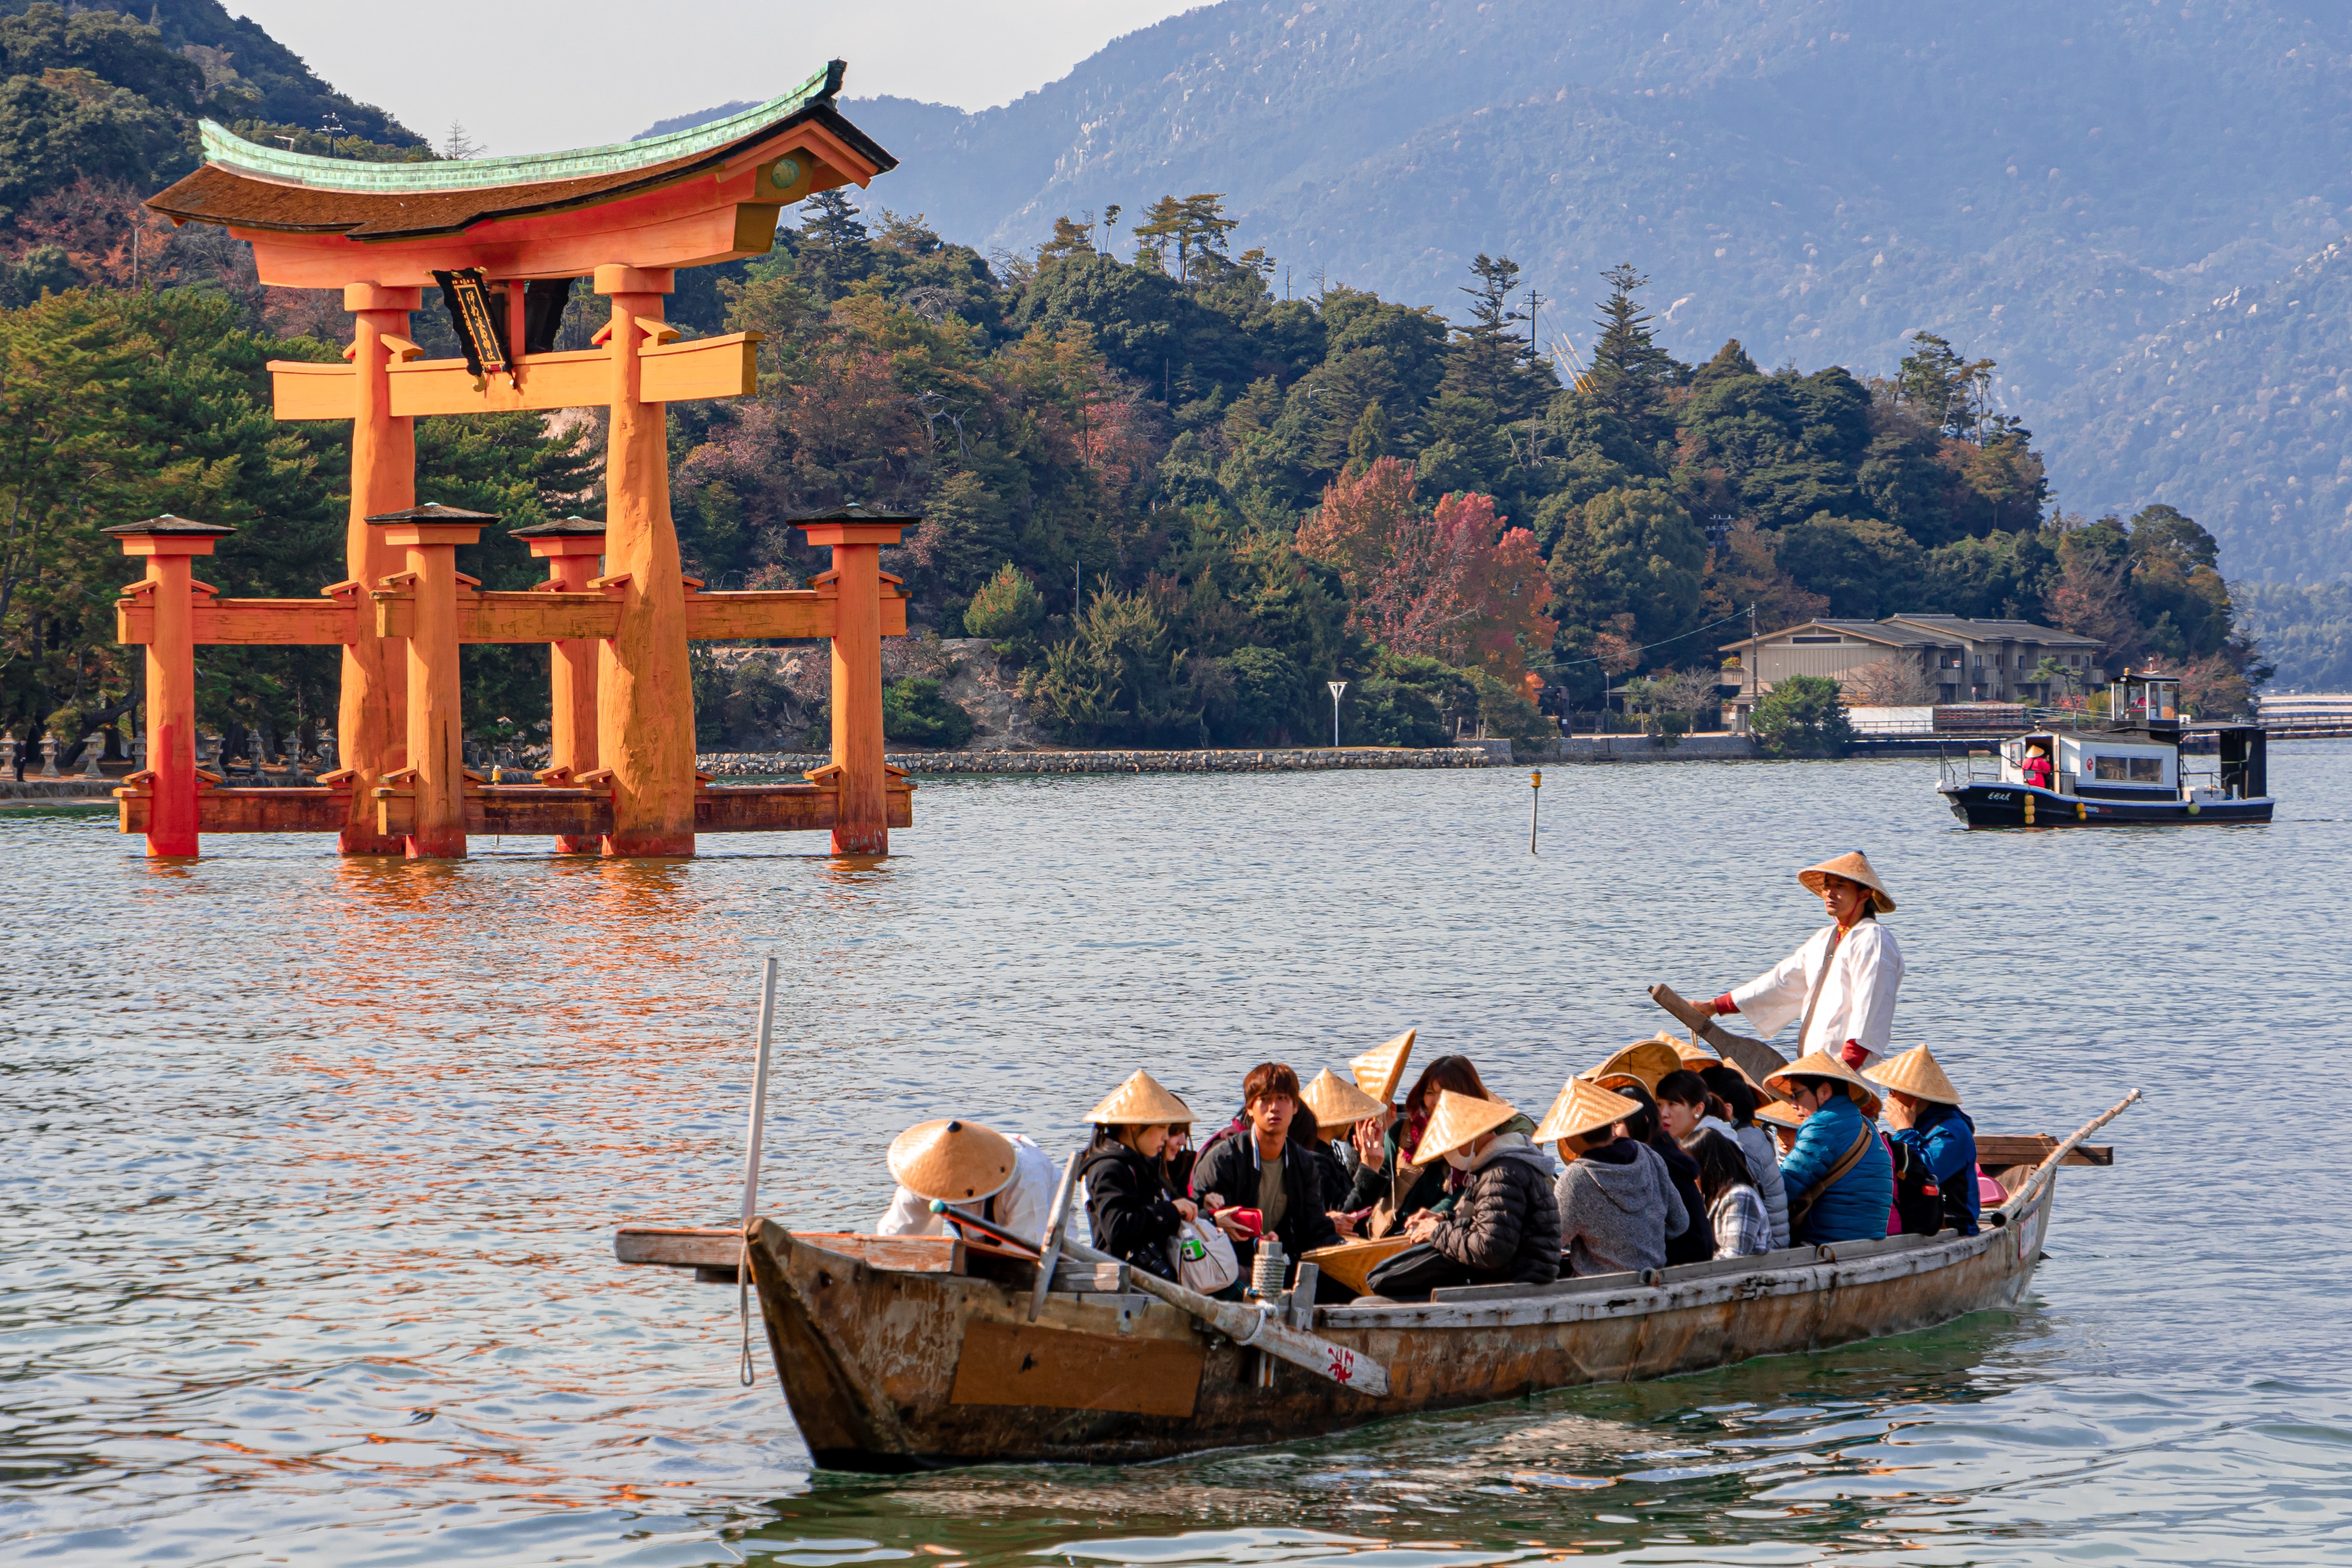 People on a boat tour in Asia